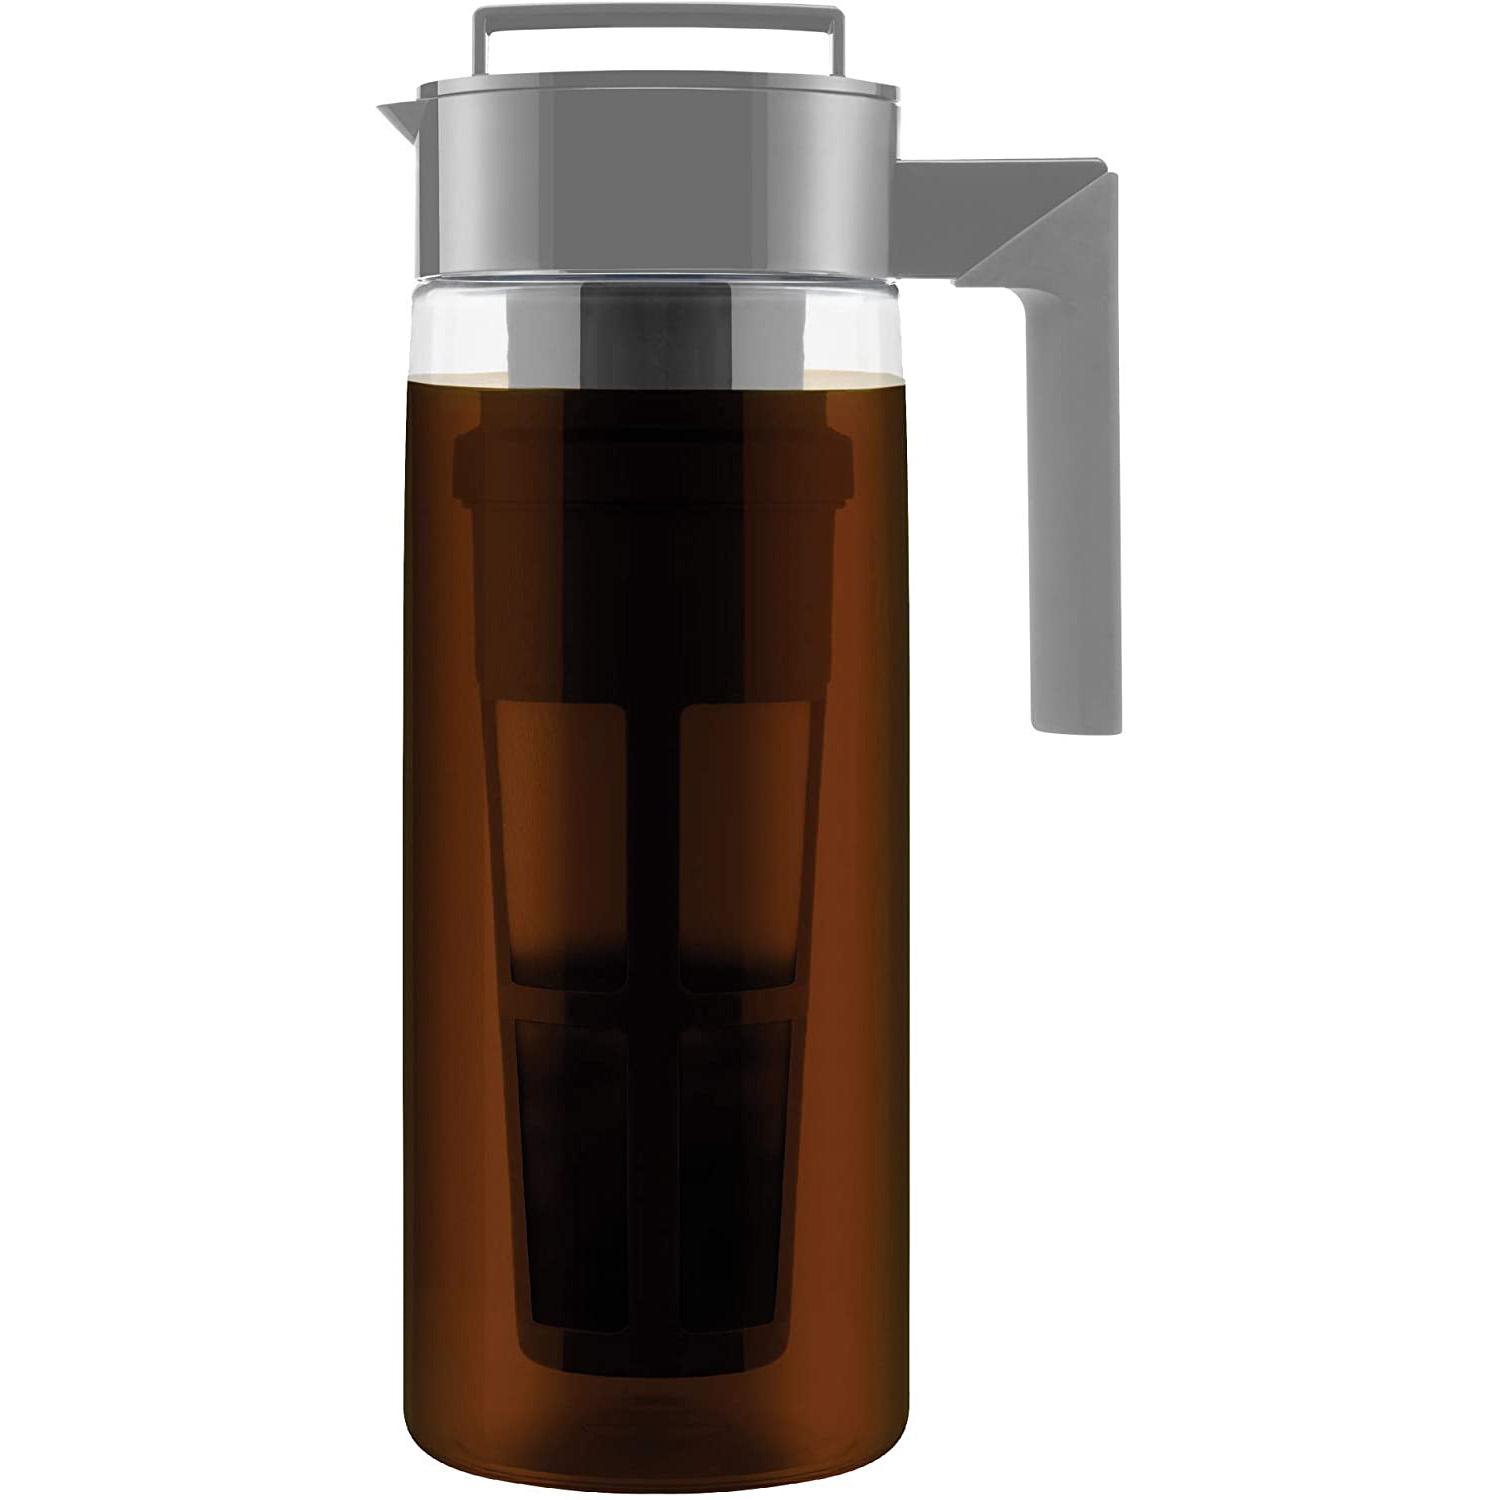 Takeya Patented Deluxe Cold Brew Coffee Maker for $18.99